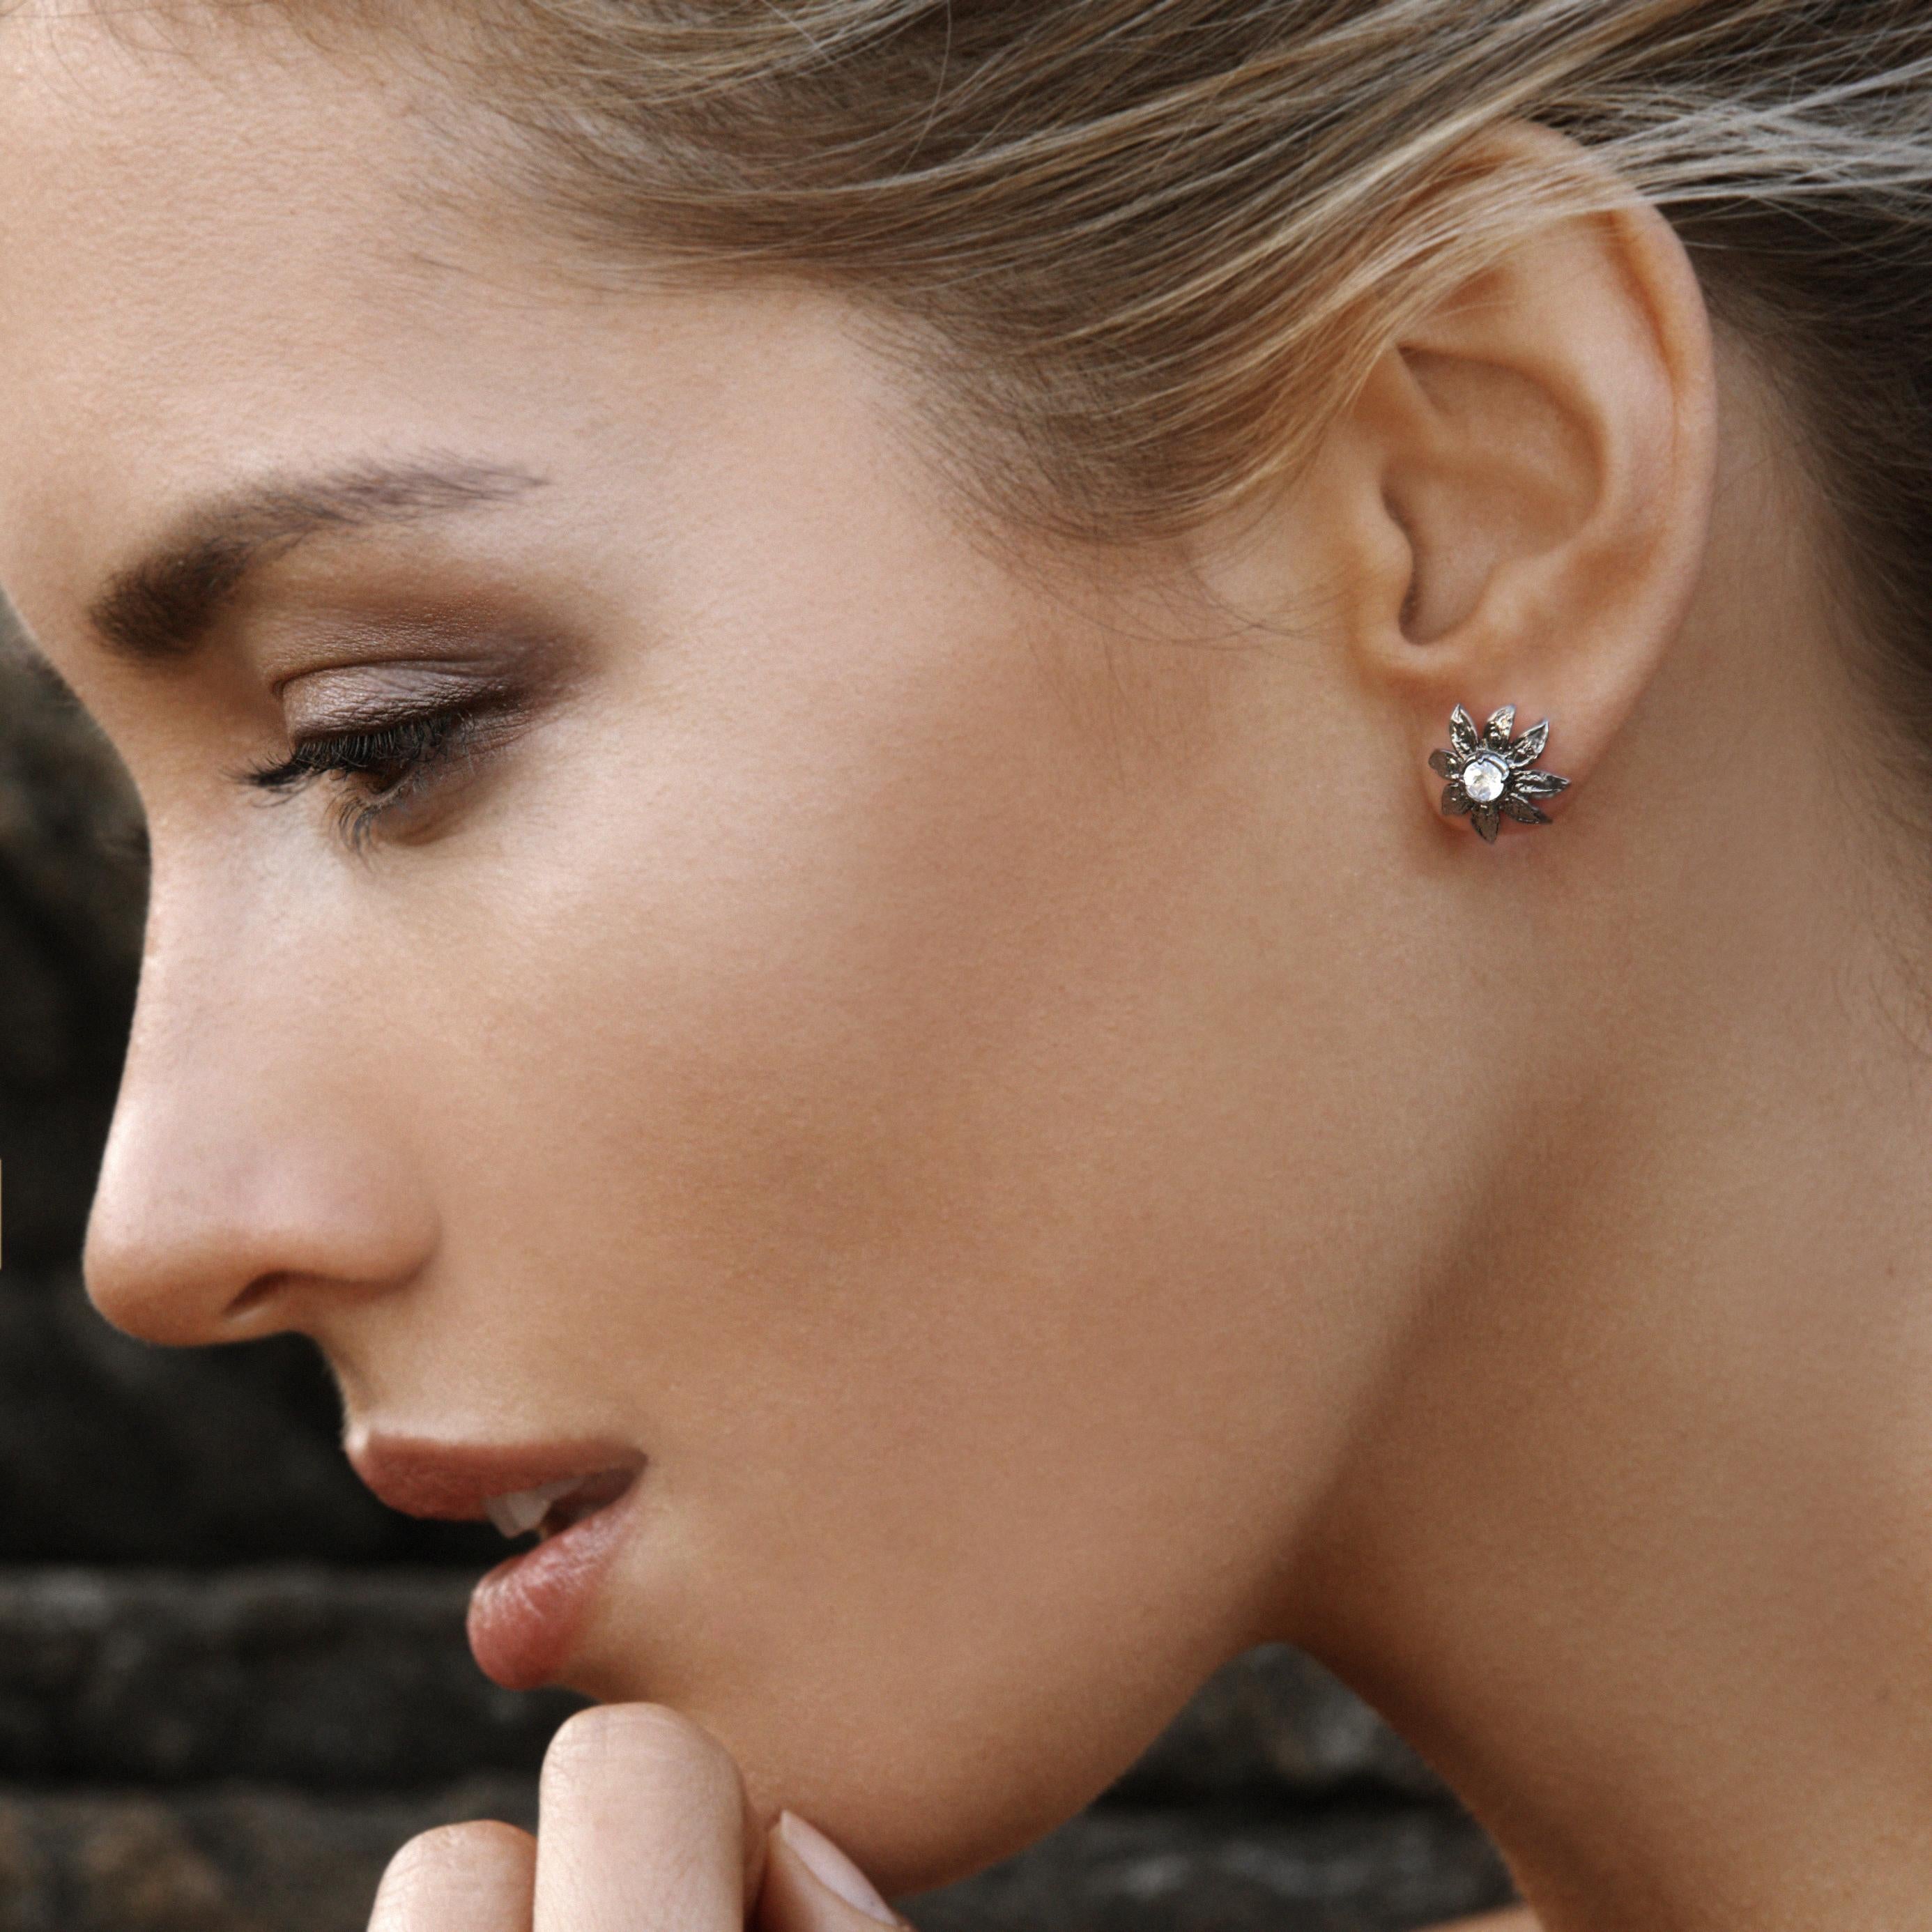 The Clematis stud earring is a natural fashion silhouette of relaxed petals emanating from a sparkly cut blue moonstone center. The sterling silver earring with 14kt gold posts hugs the earlobe perfectly.

Sterling silver w/ 14kt post
Moonstone